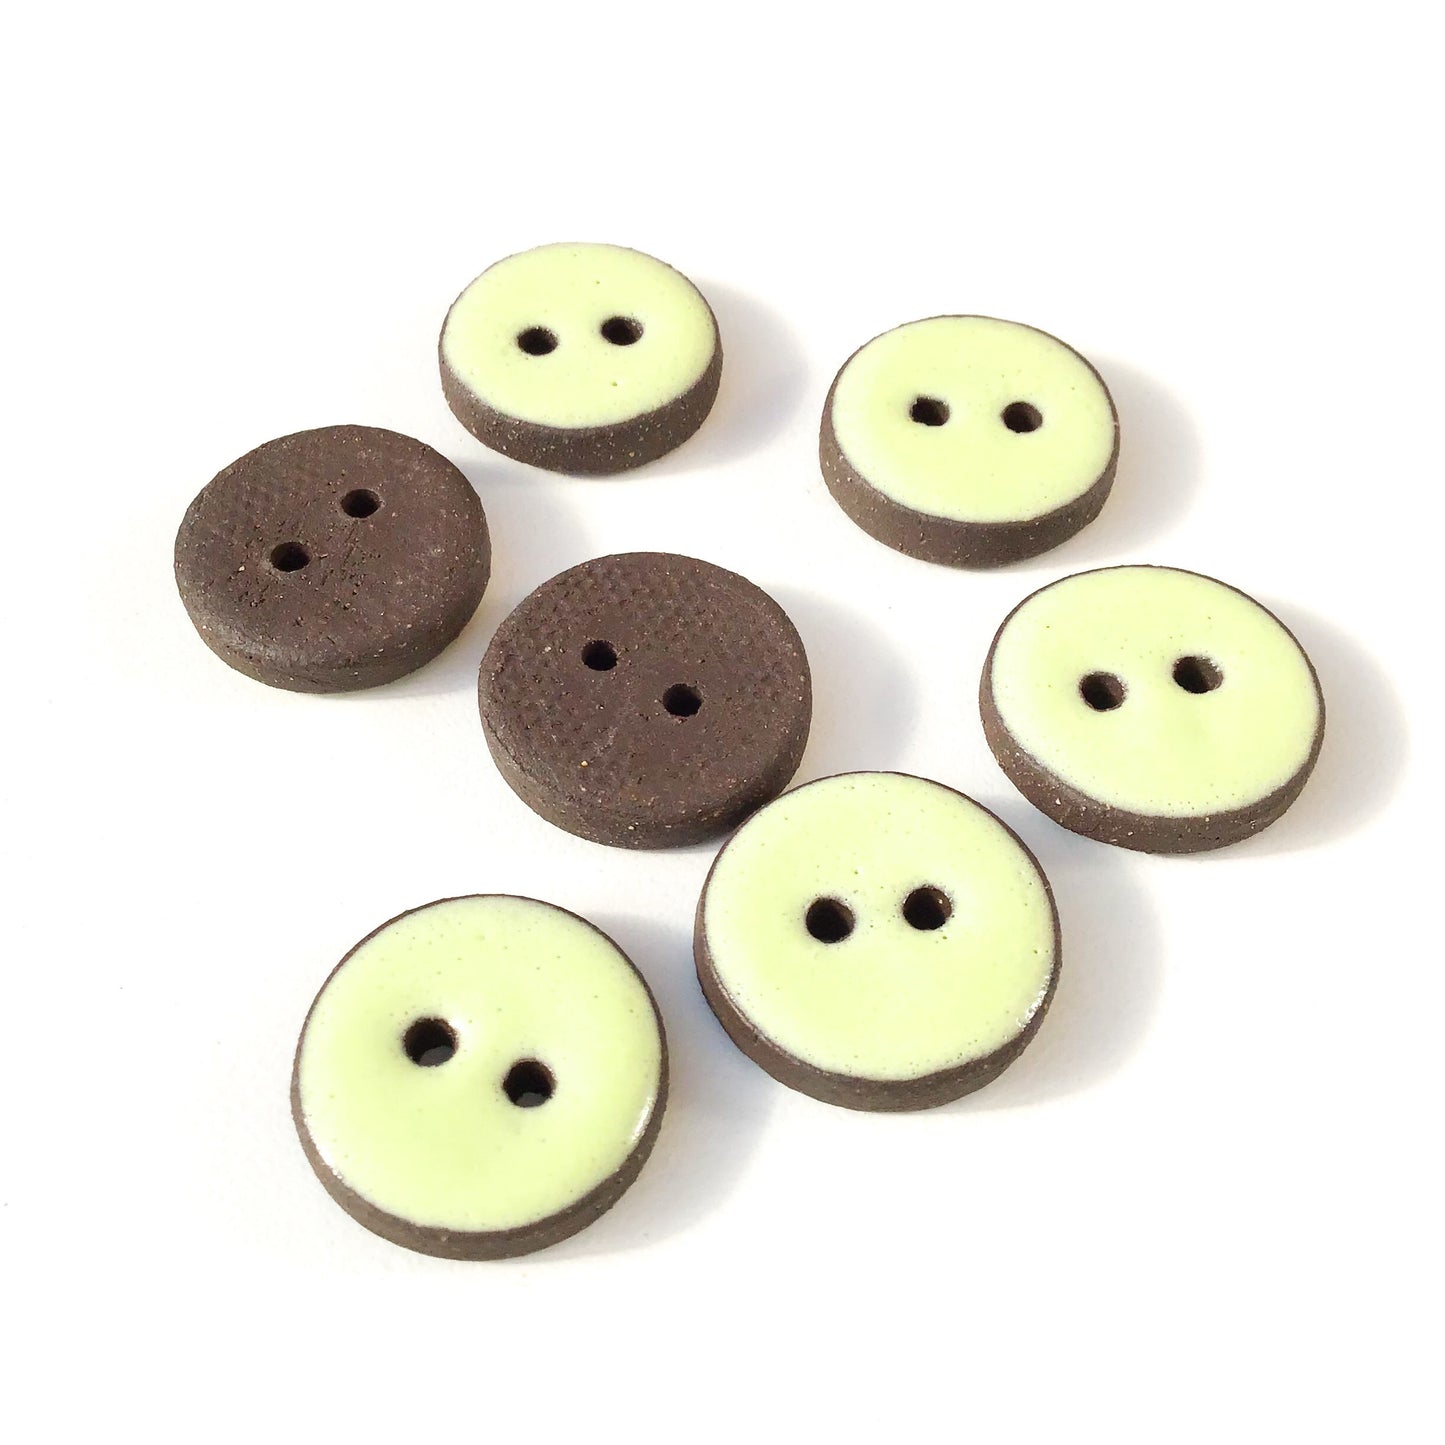 Pastel Green Ceramic Buttons - Light Green Clay Buttons - 3/4" - 7 Pack (ws-154)